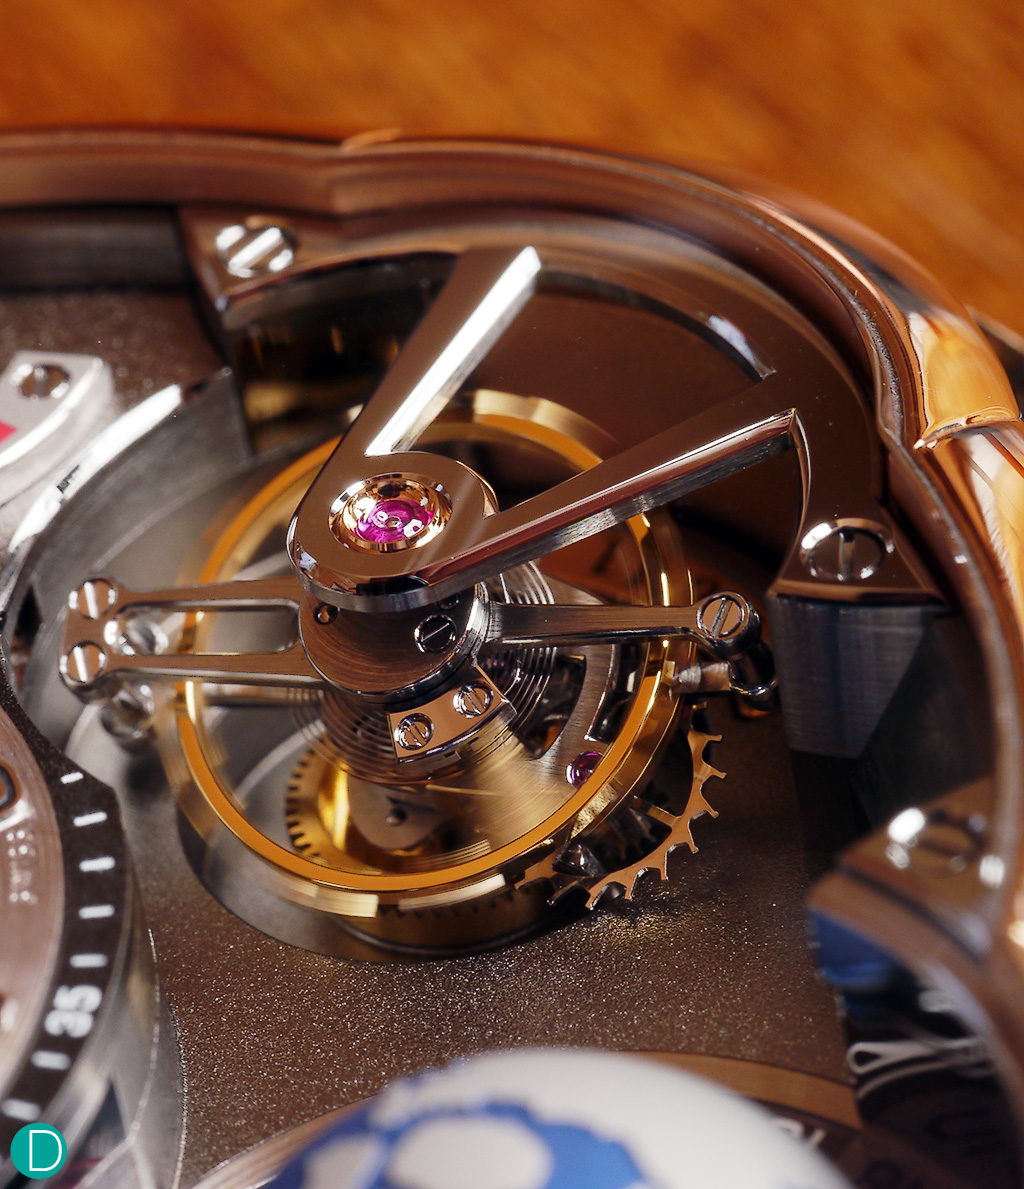 Detail of the Greubel-Frosay incline tourbillon. Note the high level of finishing on the tourbillon cock, which is opened to allow the viewer to have an unblocked view of the inclined tourbilllon, and allow the watchmaker to show the finishing artistry on the bridge itself with the sharp anglage and inward angles within.